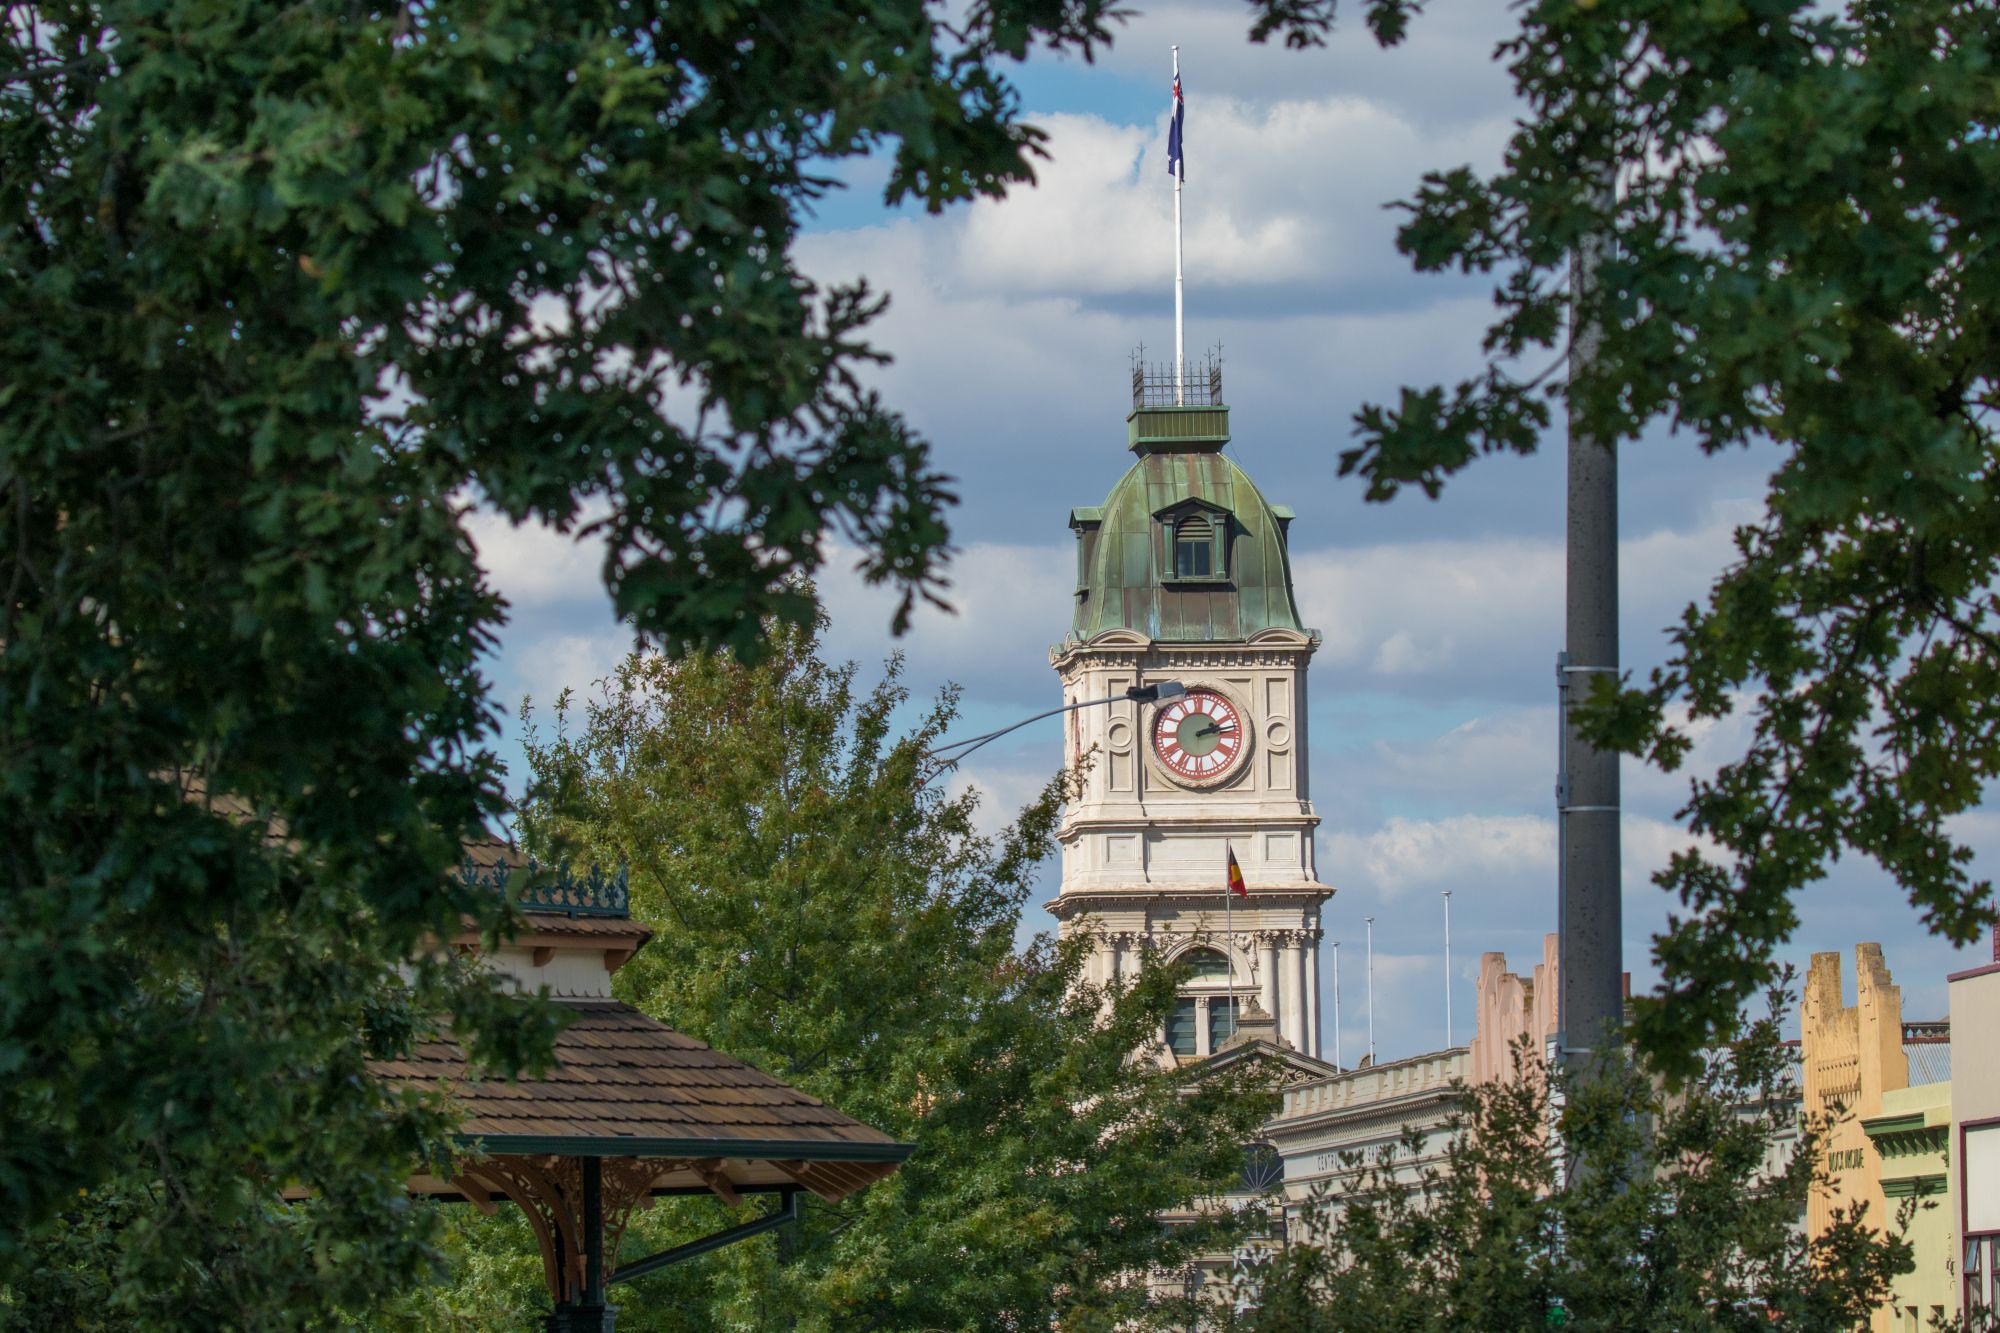 Generic image of Town Hall from a distance